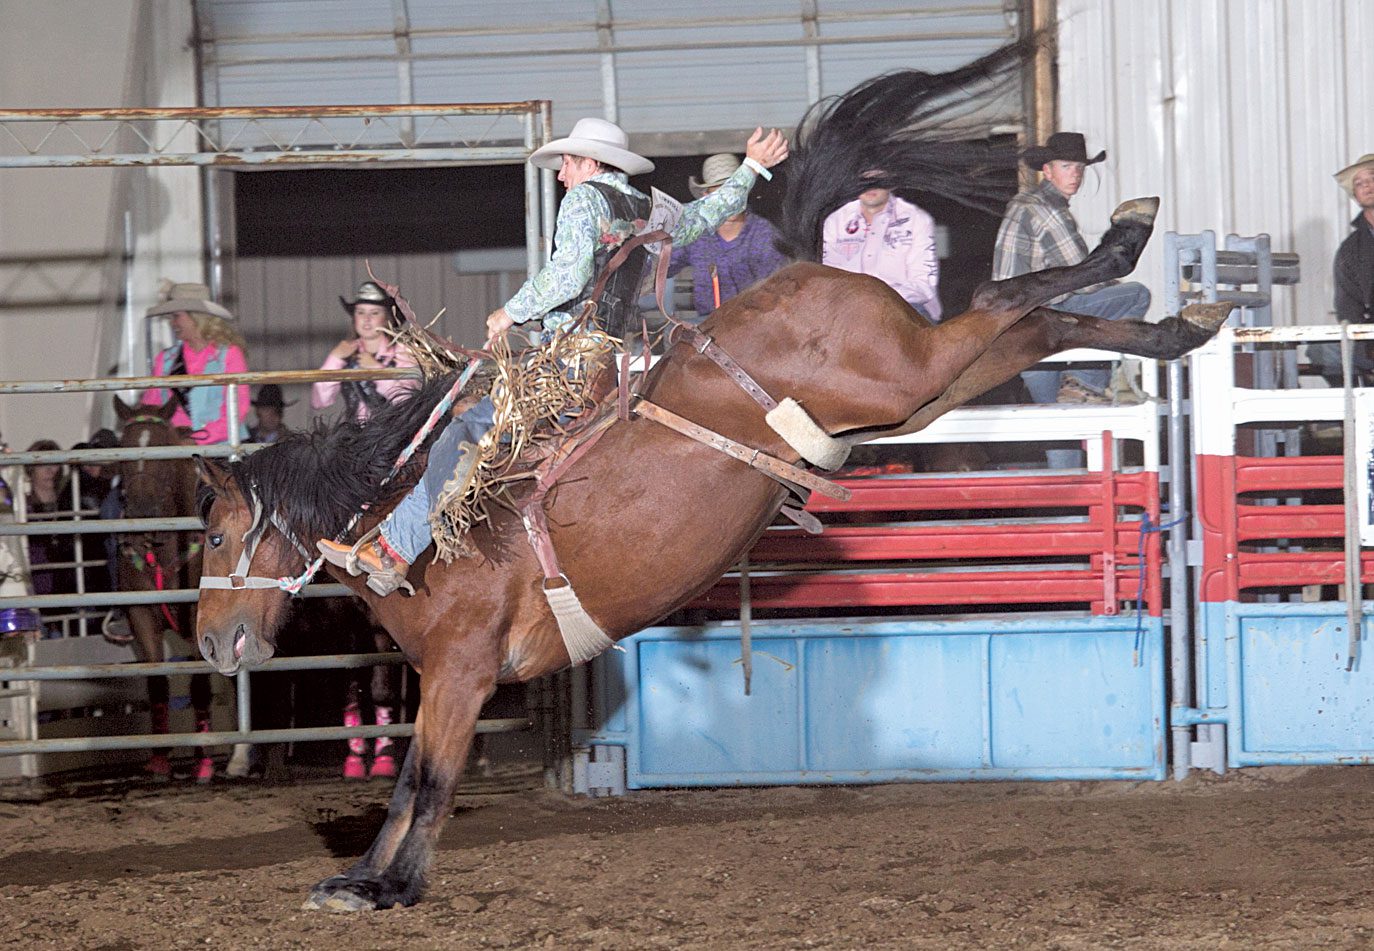 Ethan Wessel, CPRA, Rodeo News